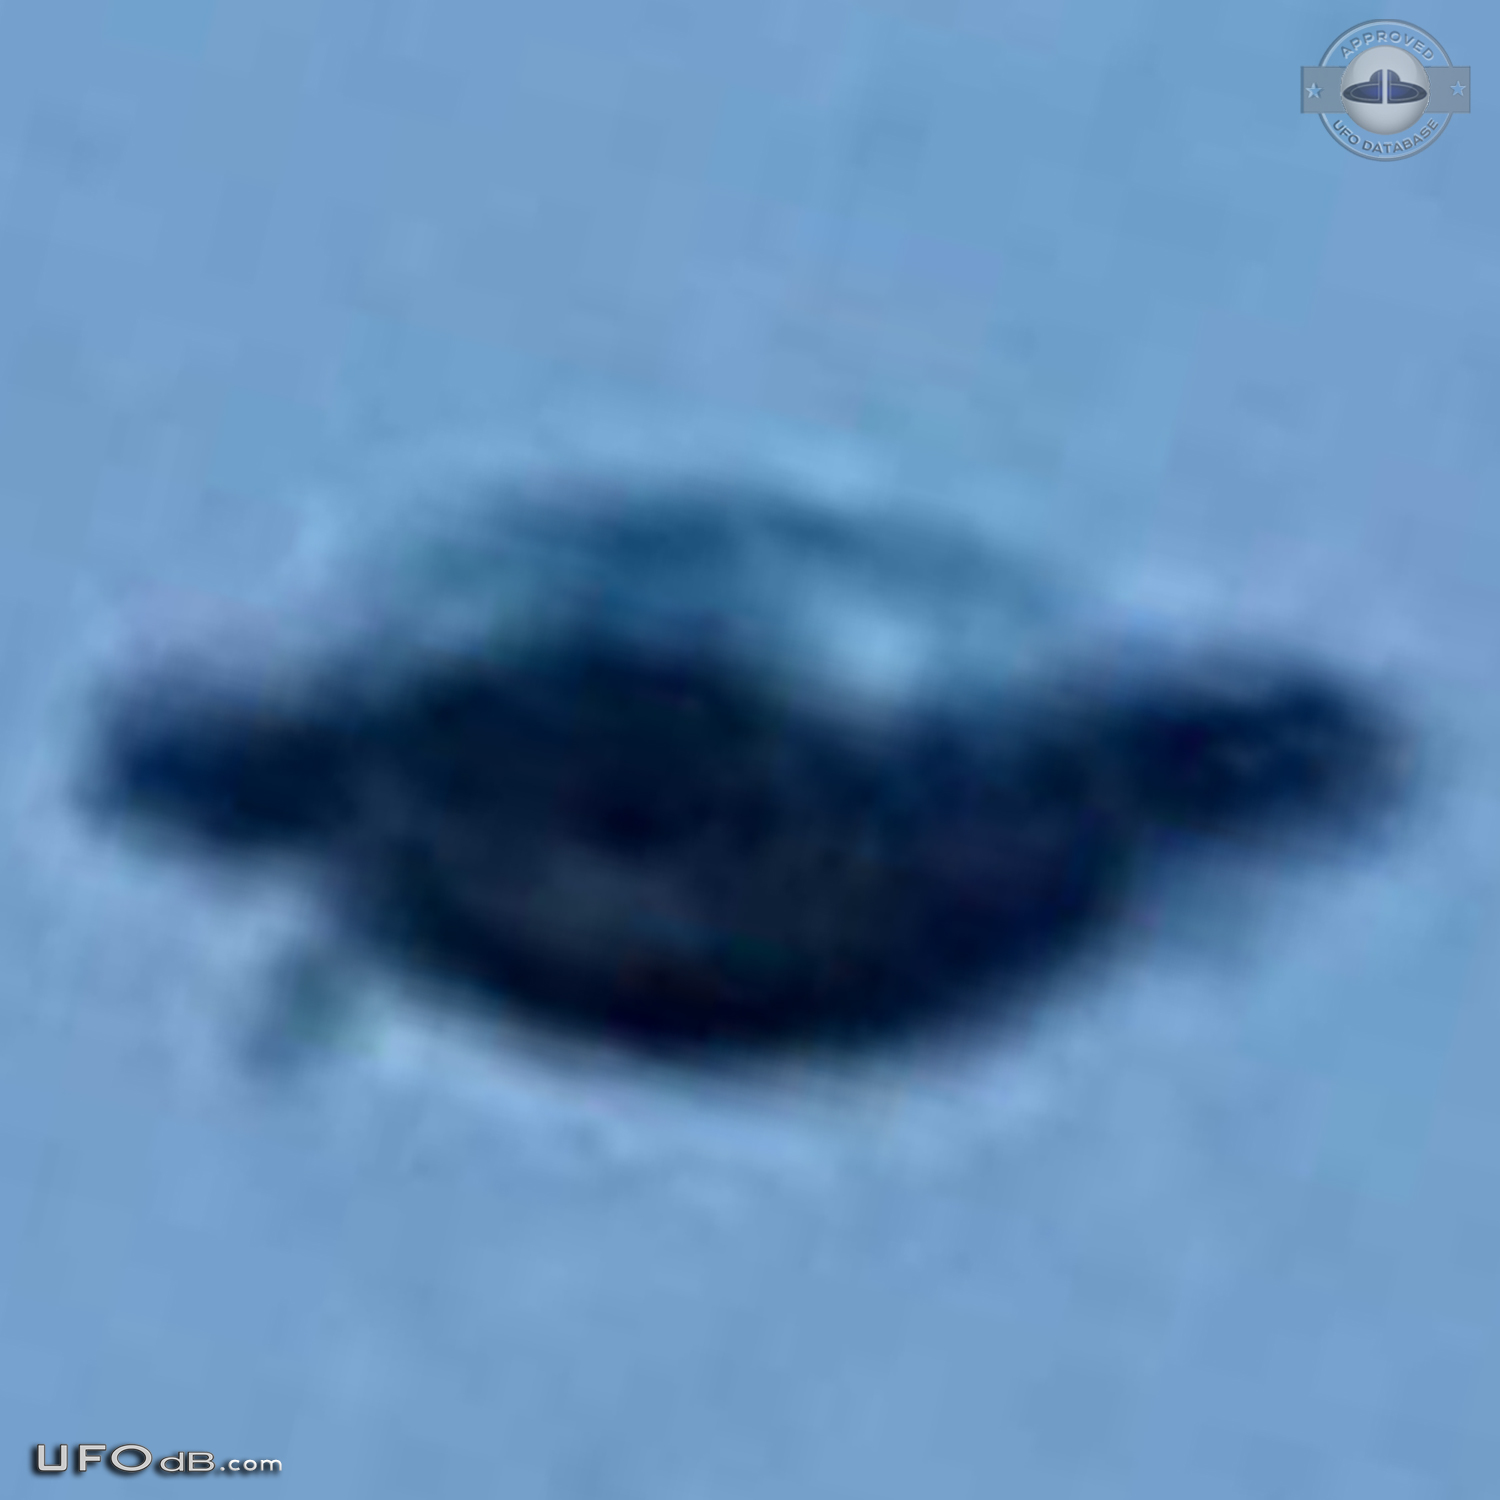 Father and Son in Zagreb, Croatia sees UFO and get picture - 2006 UFO Picture #441-4